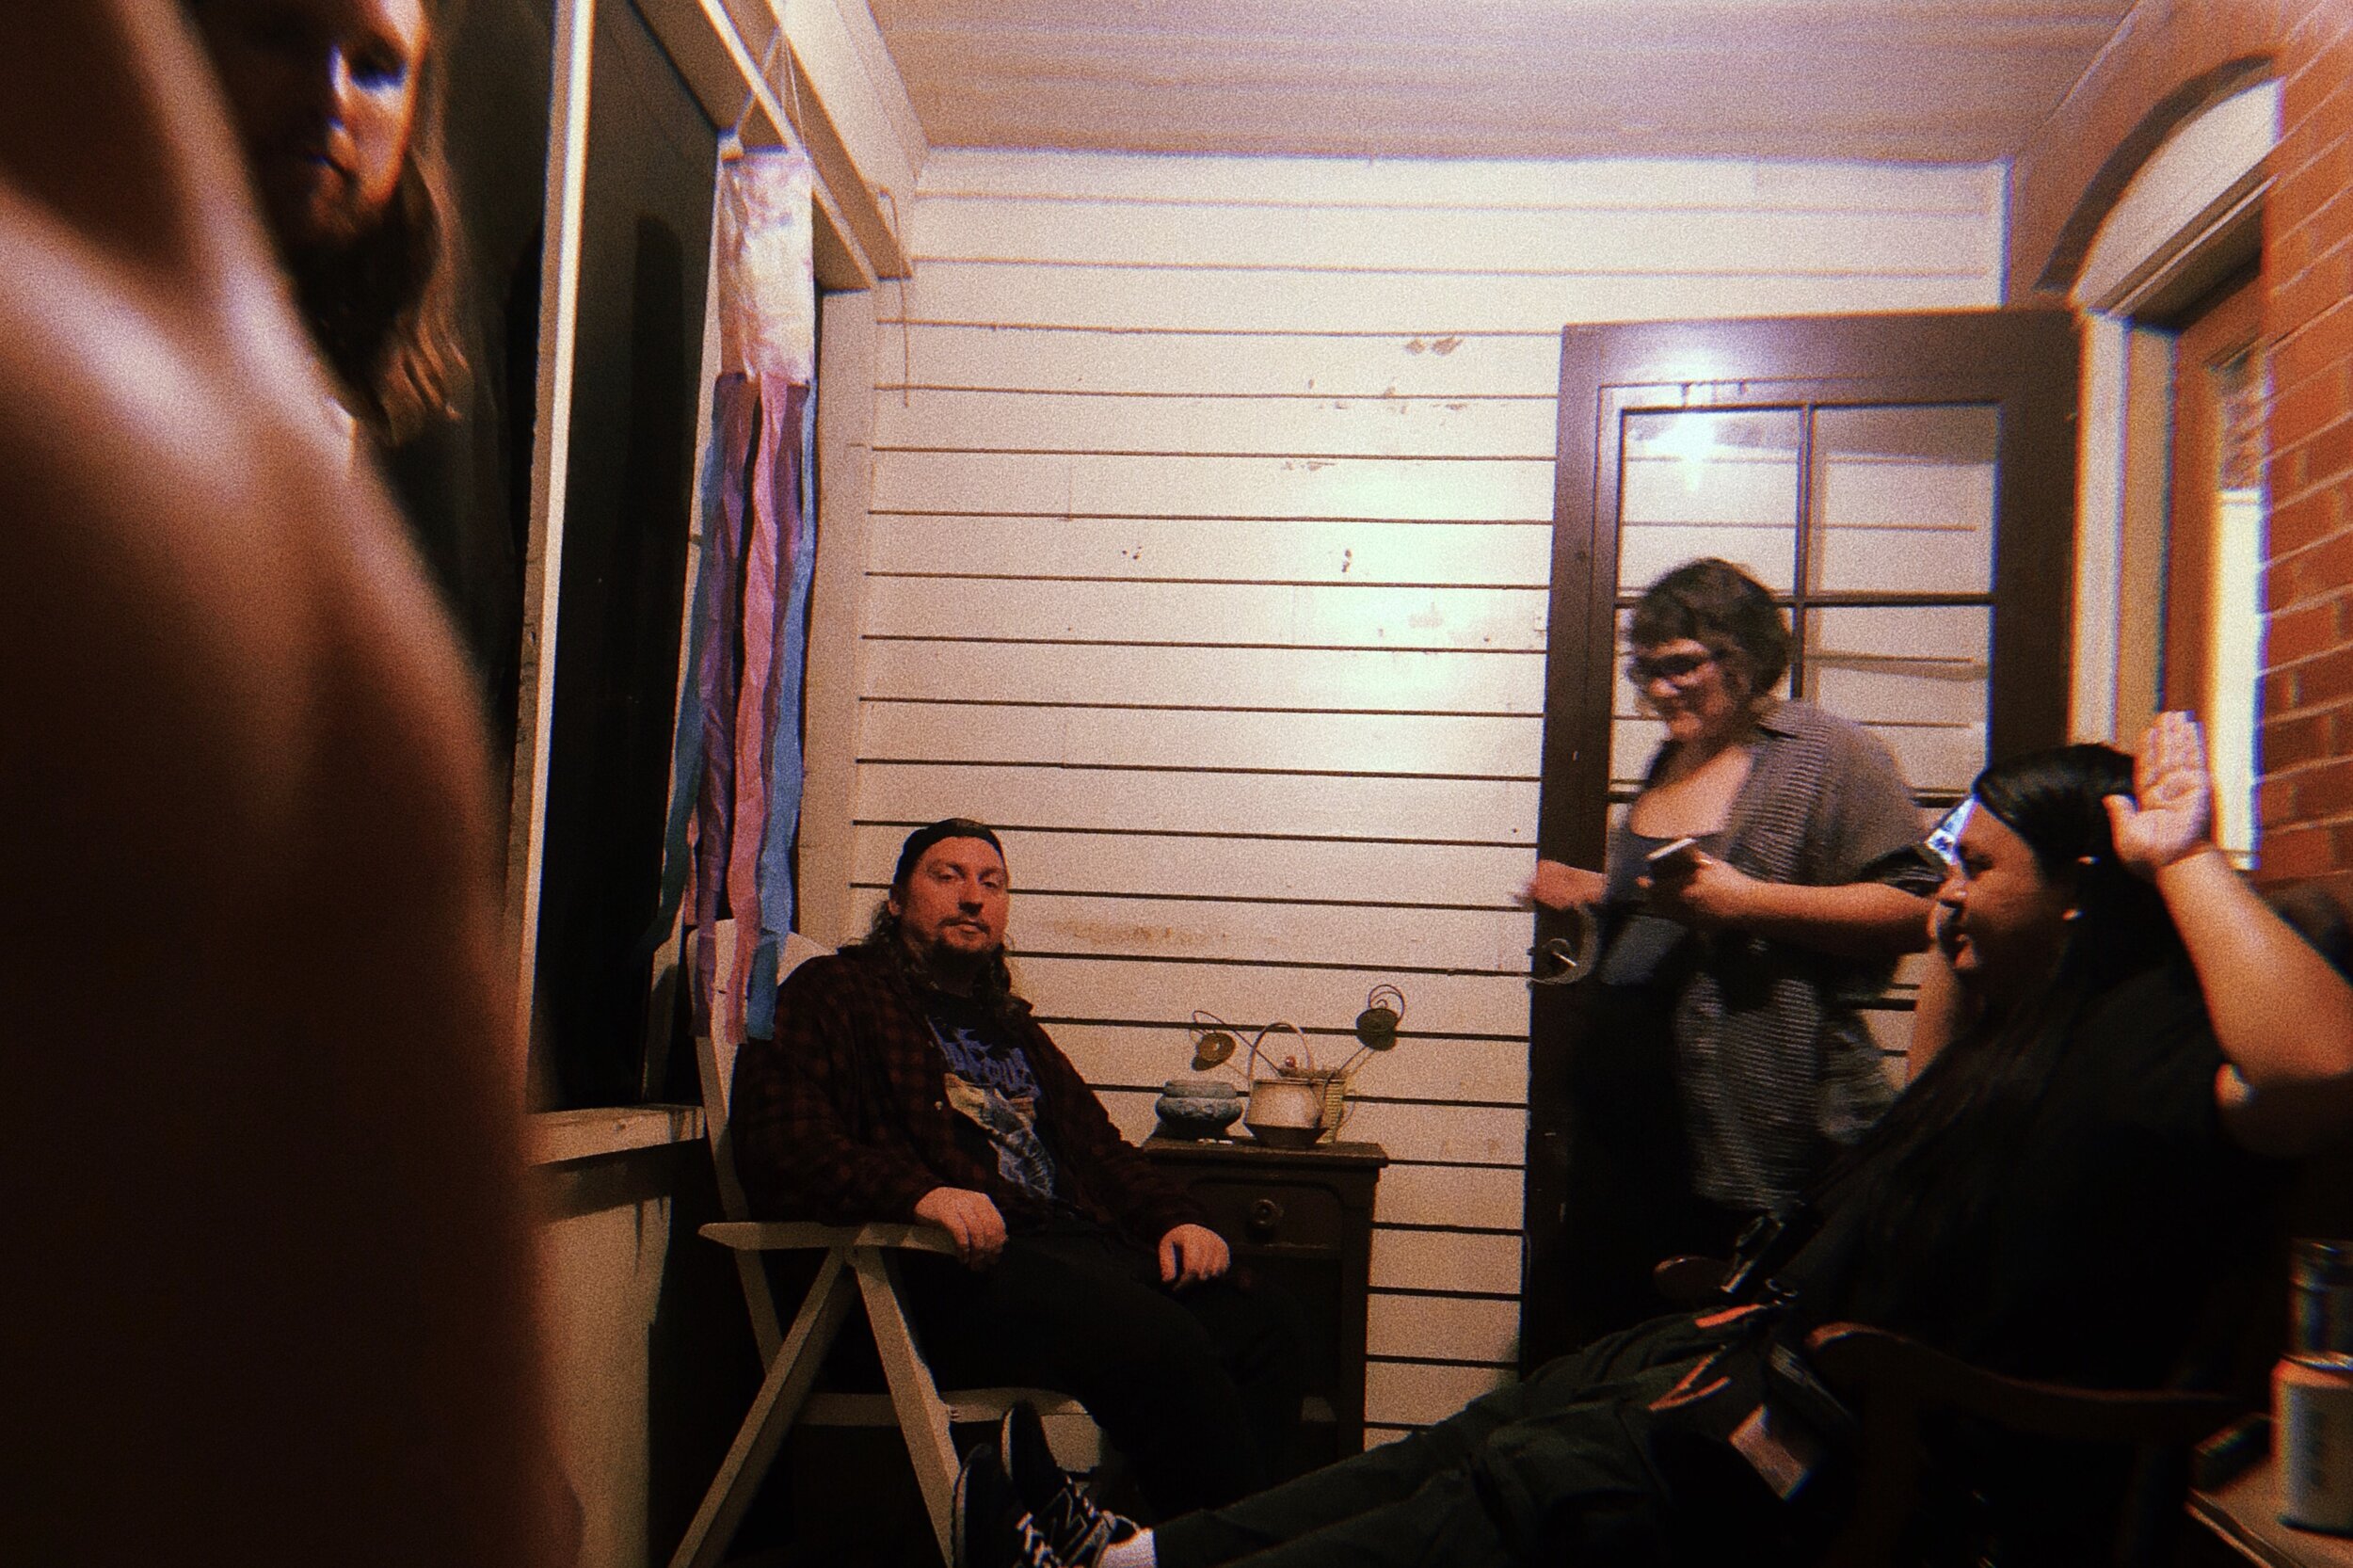   think this is the only photo I got of our manager! She’s the literal best!   We just played in a basement in Harrisonburg, Virginia. It’s not too humid. A bunch of people just went to go to a place called Cookout and urged us to go as soon as possi